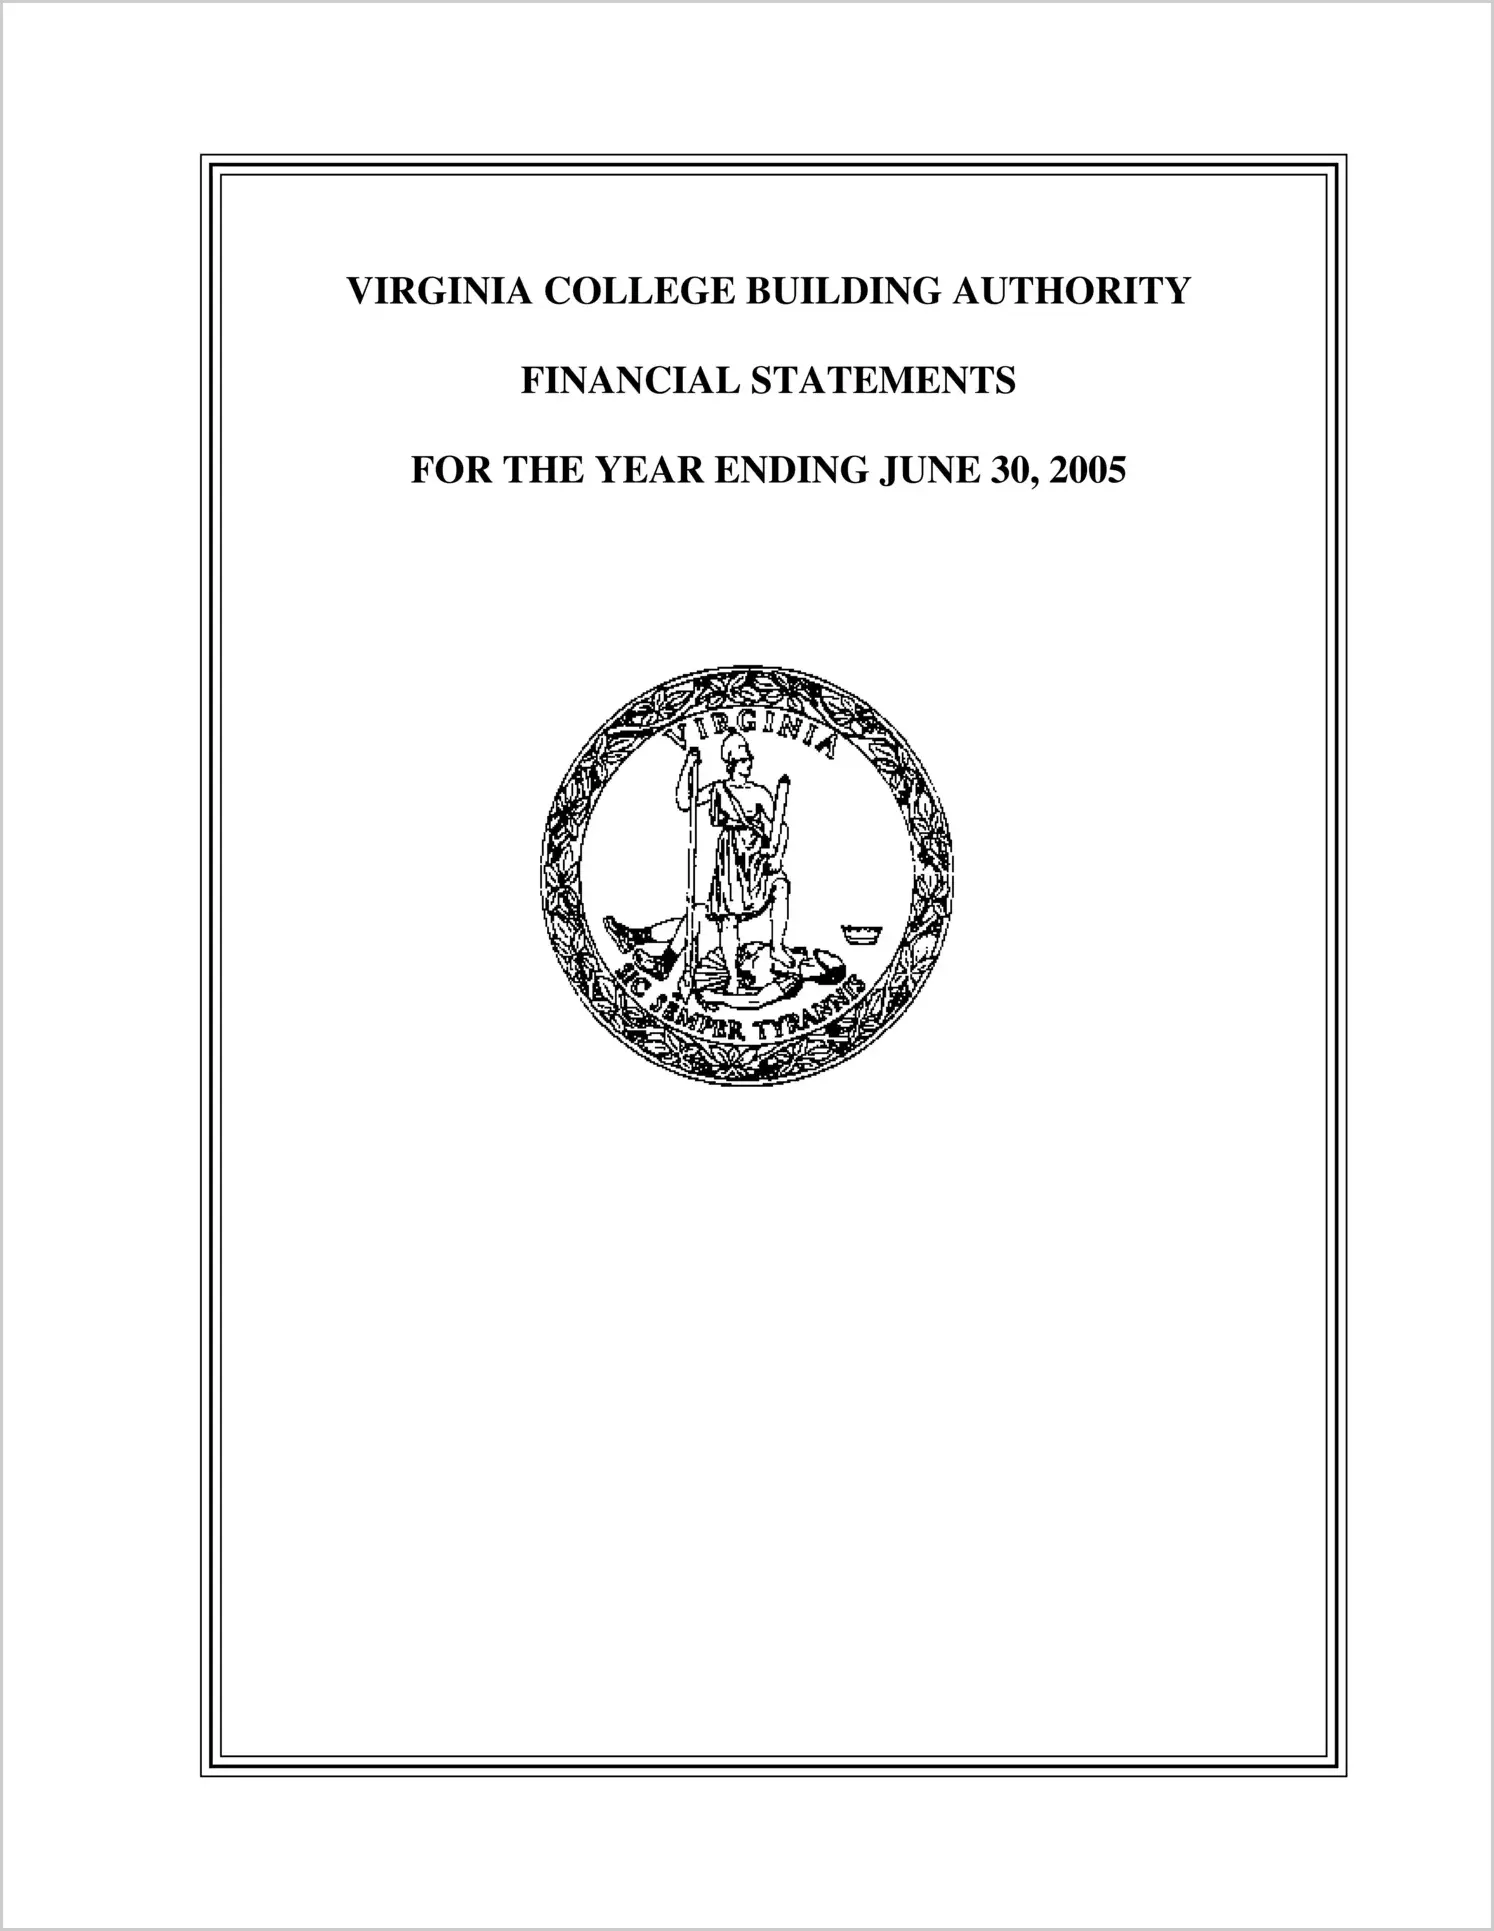 Virginia College Building Authority Financial Statements for the year ended June 30, 2005